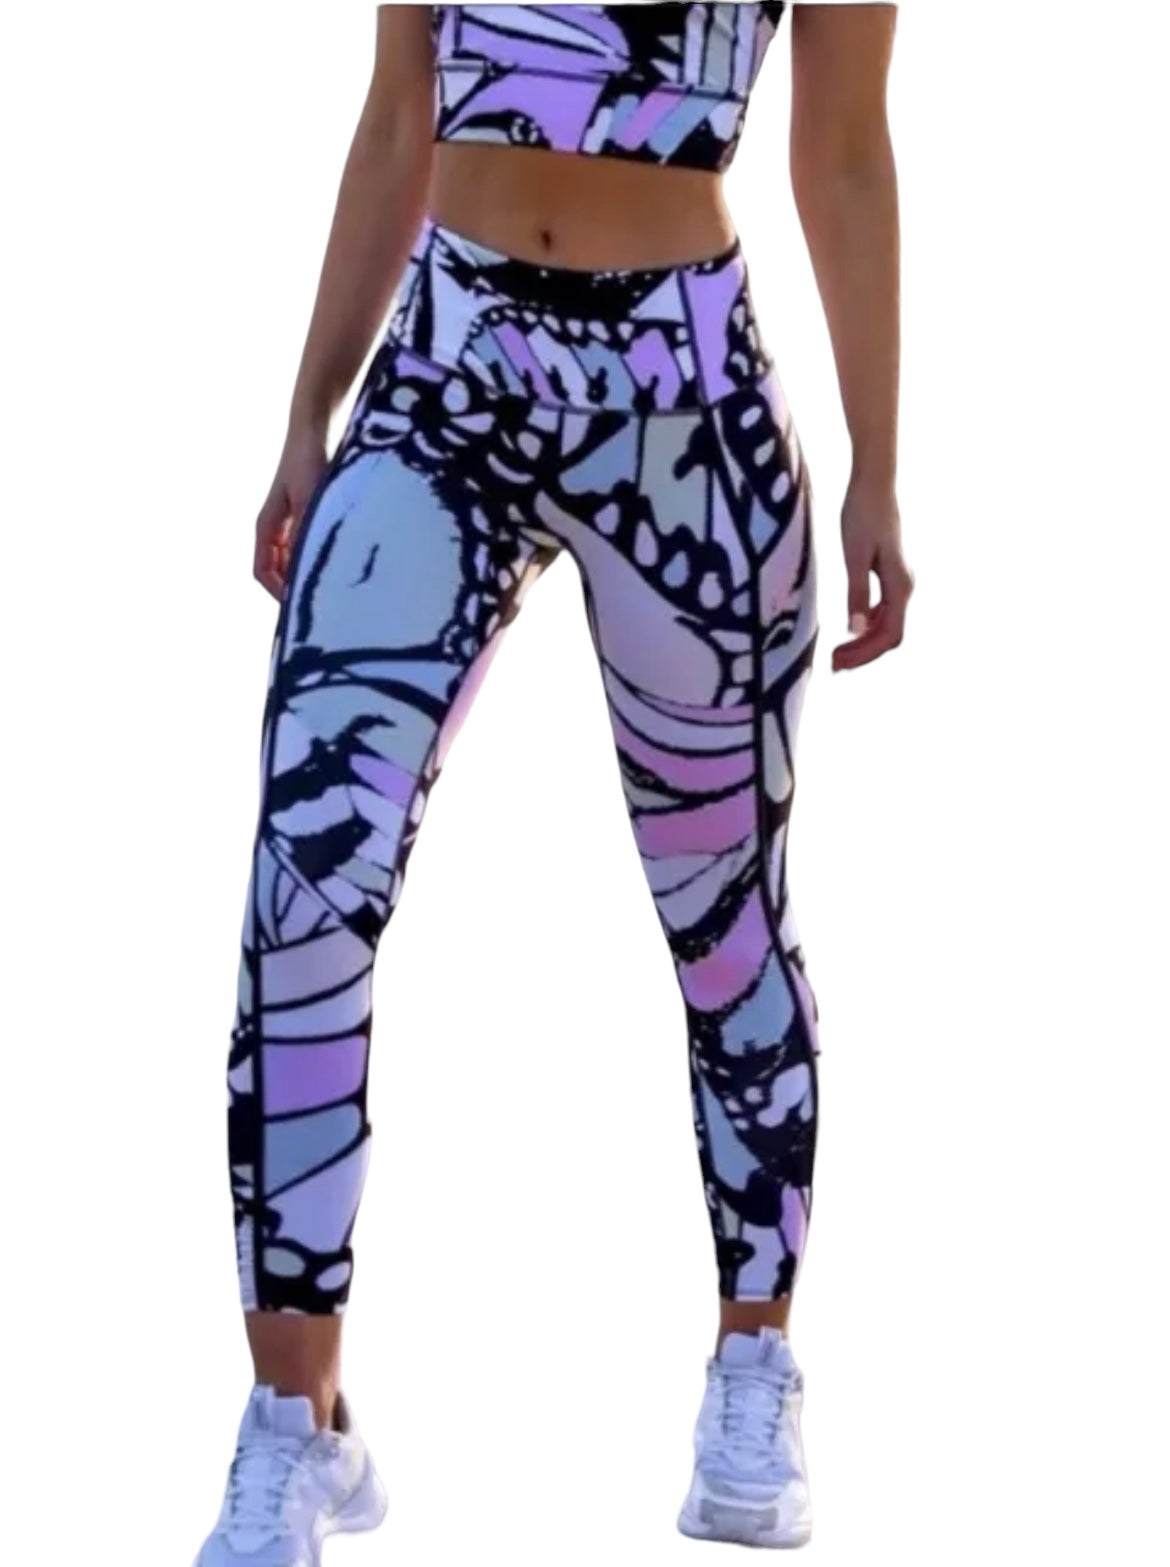 Free People Movement women's butterfly print active leggings XS